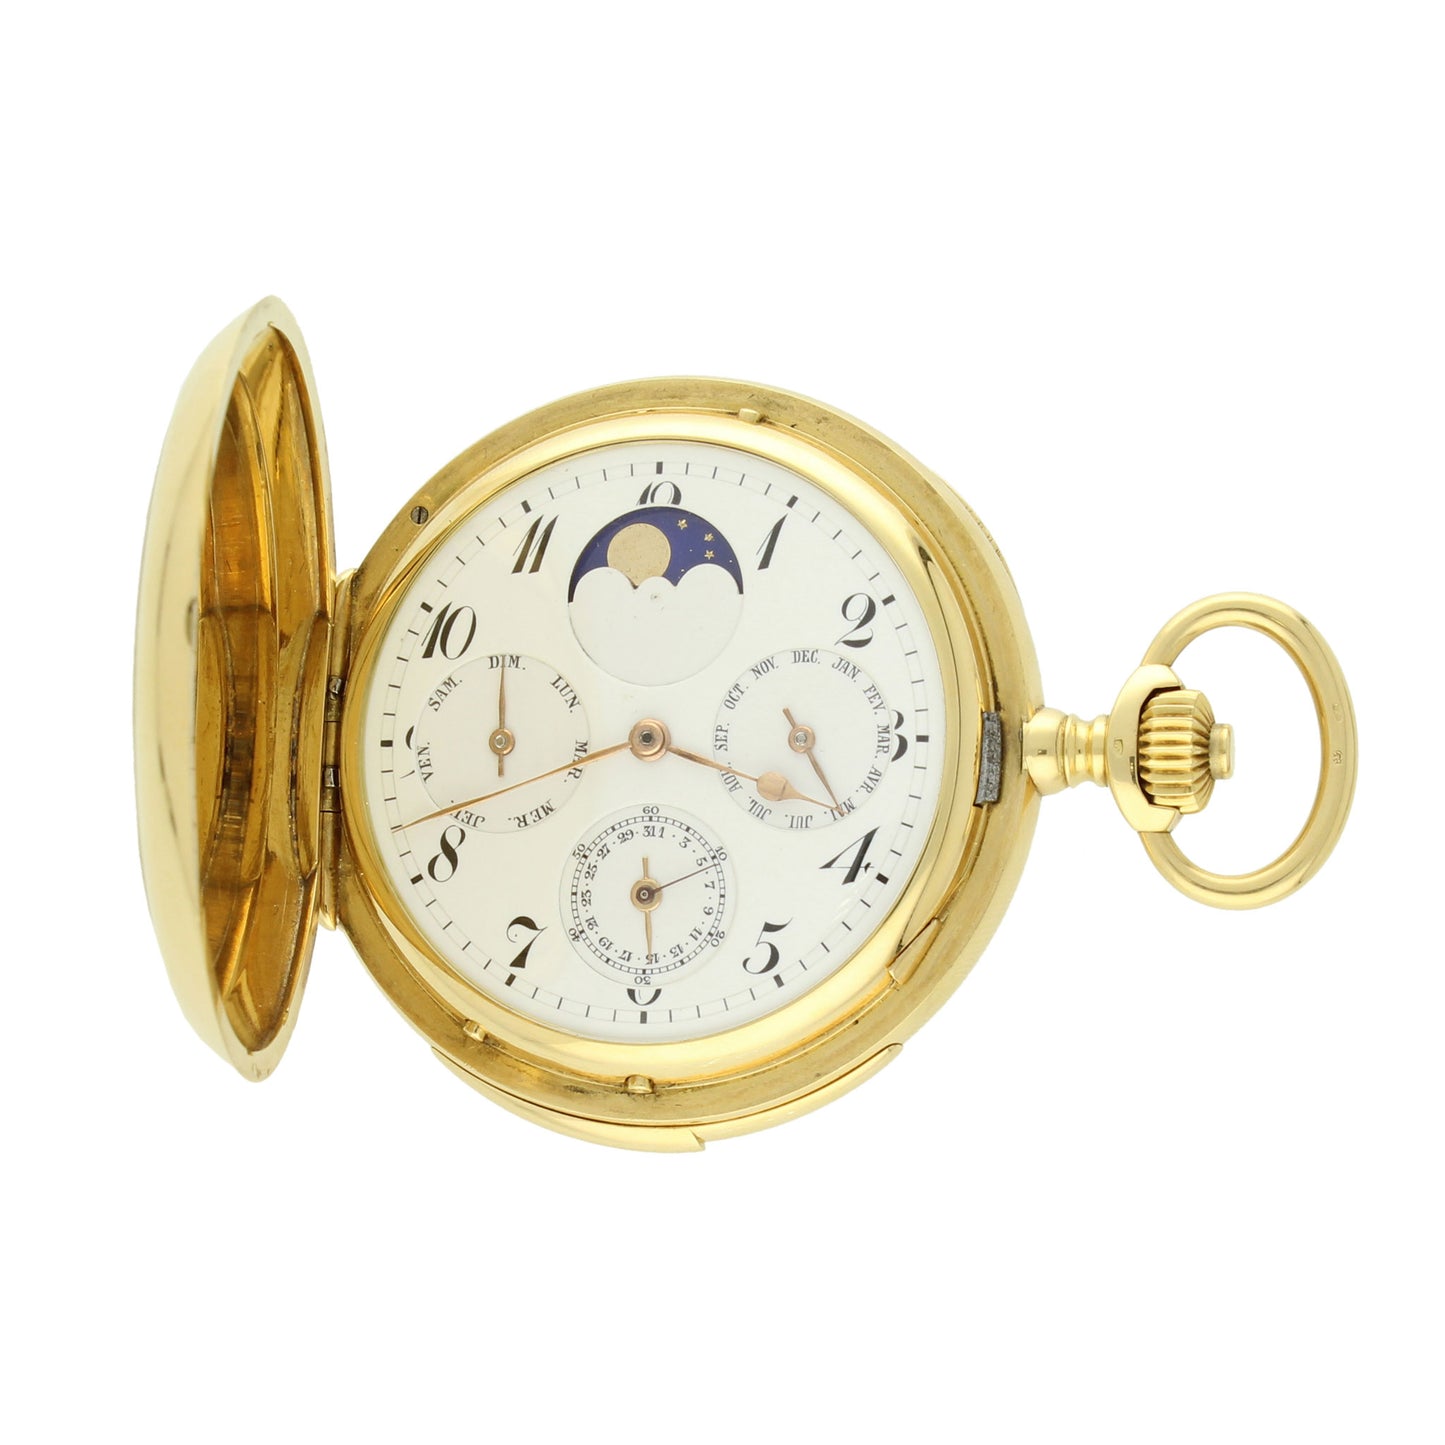 18ct yellow gold hunter case minute repeating, triple date calendar pocket watch with moonphases. Made 1916